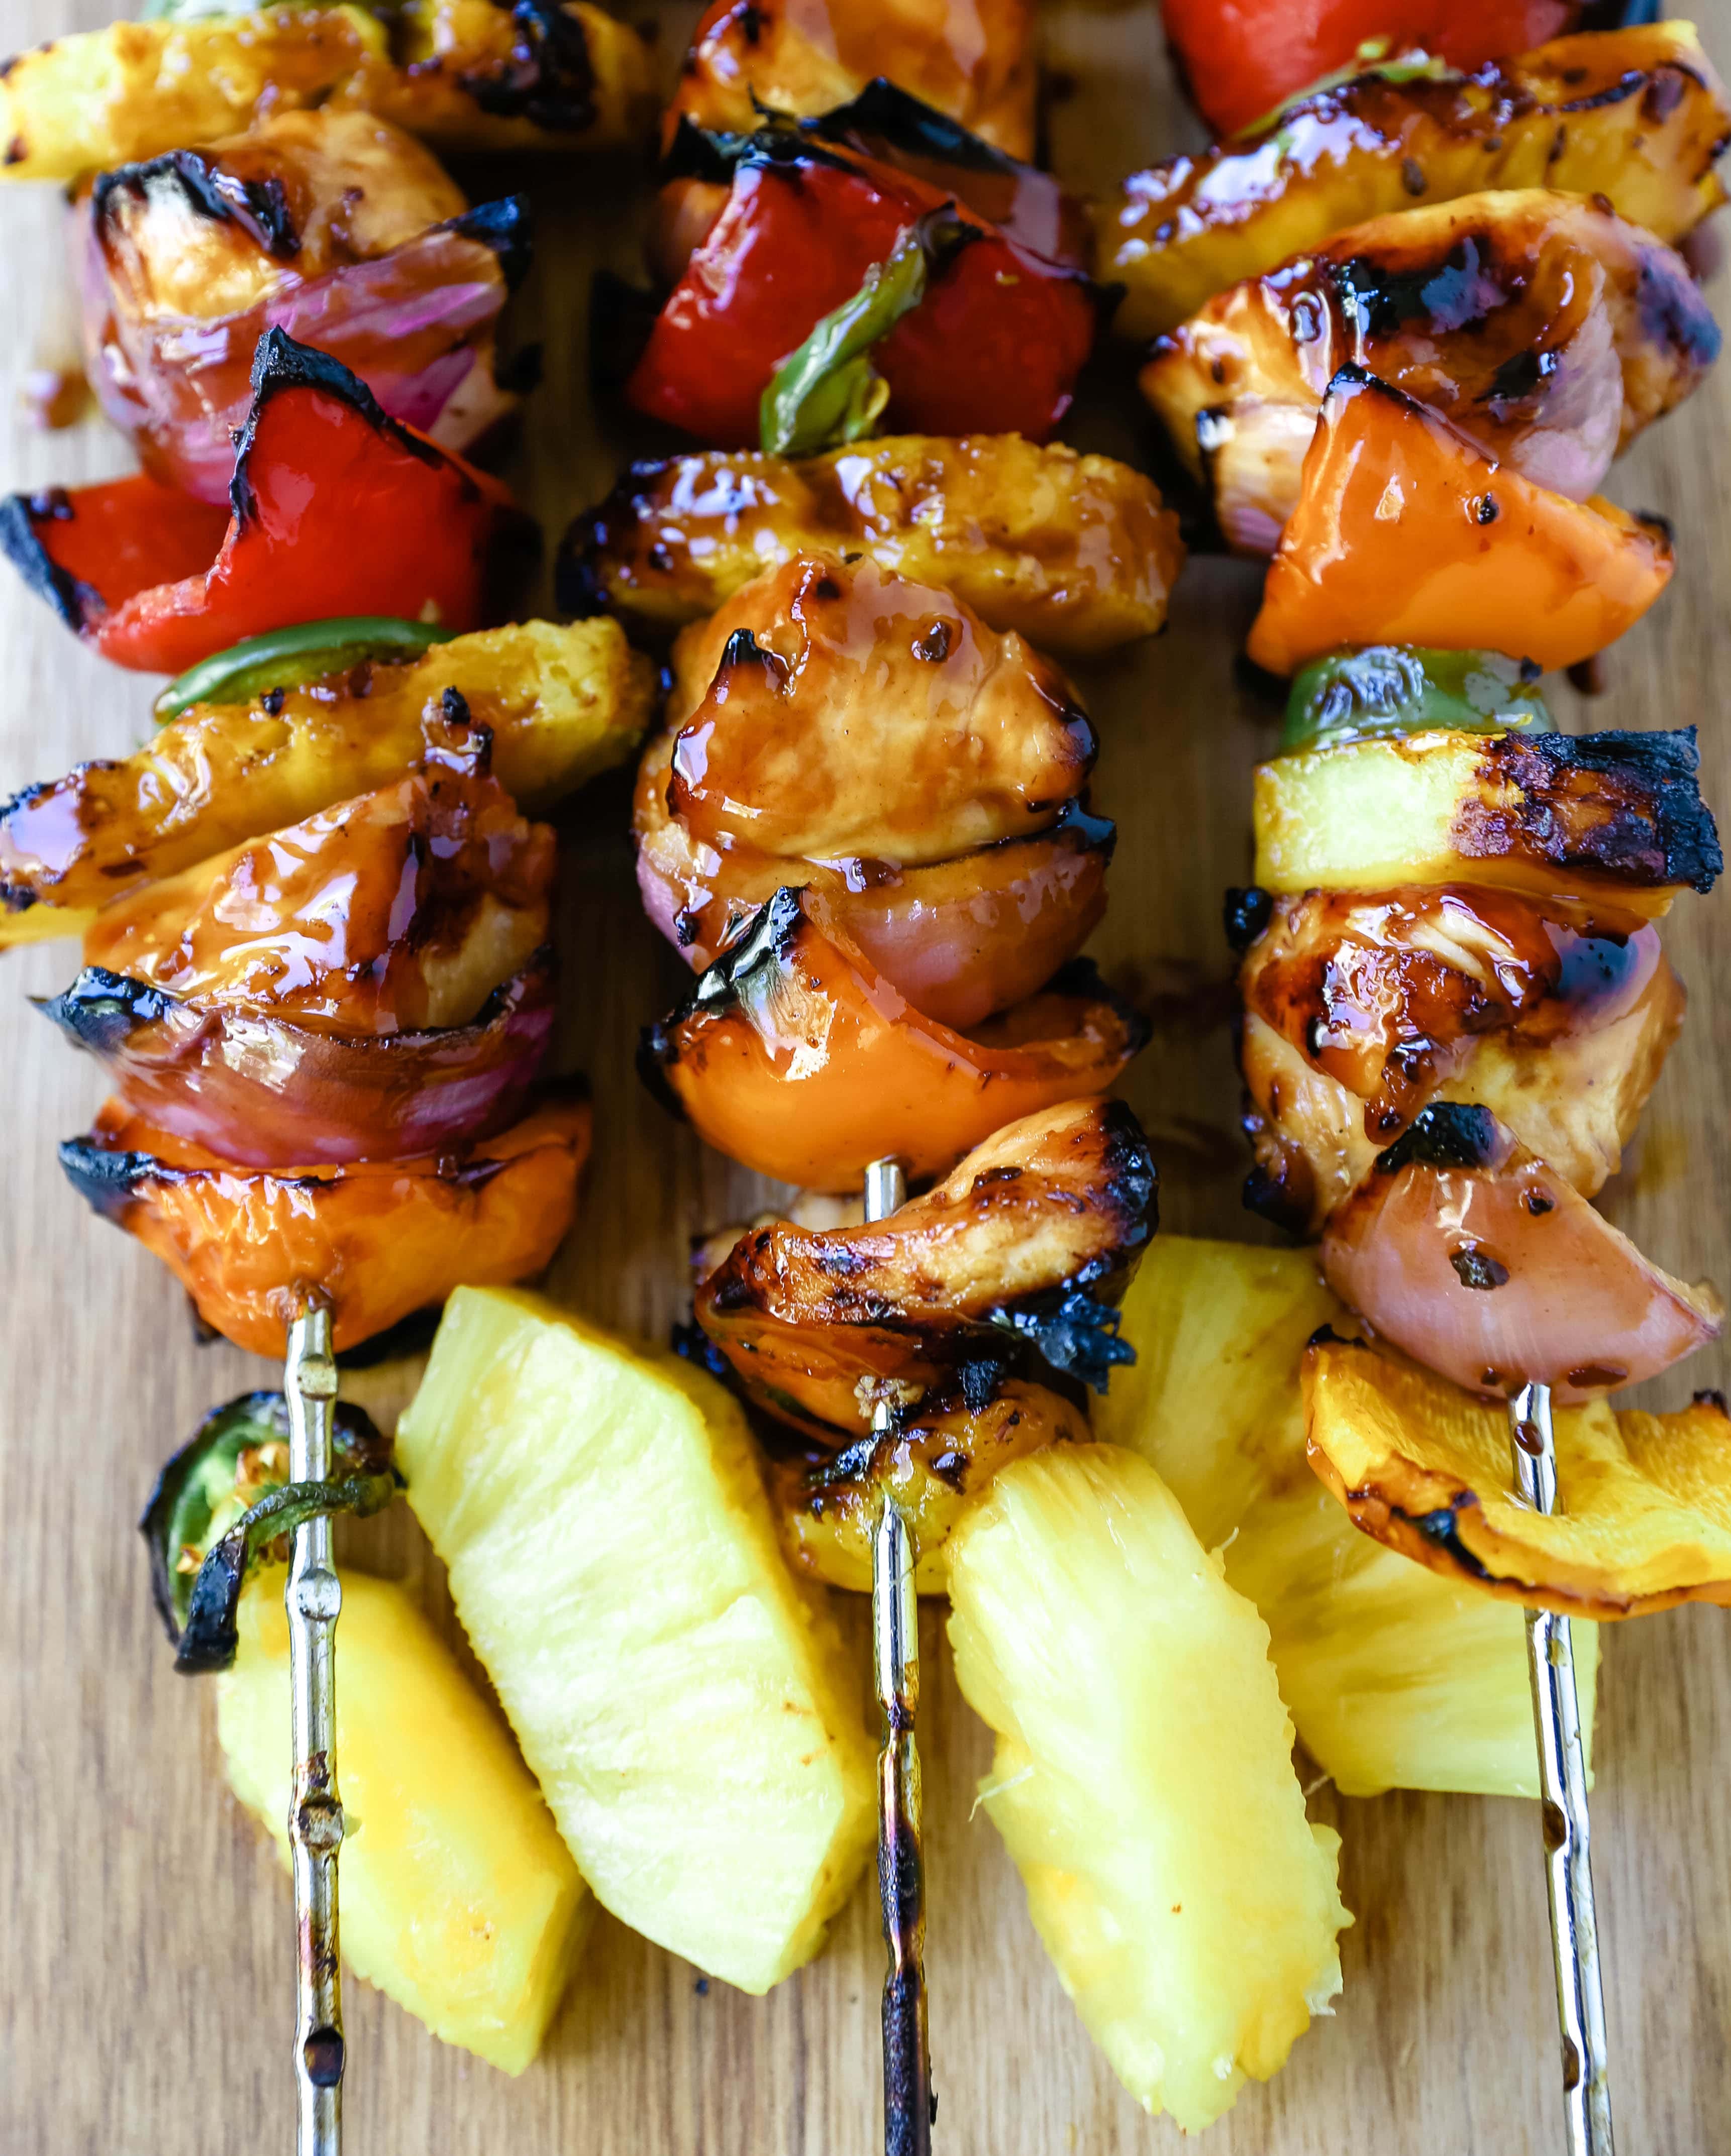 Hawaiian Teriyaki Chicken Skewers Grilled chicken skewers with peppers, onions, pineapple, and jalapeño basted in a sweet and salty teriyaki sauce and grilled to perfection. www.modernhoney.com #chickenskewers #chickenkabobs #teriyakichicken 